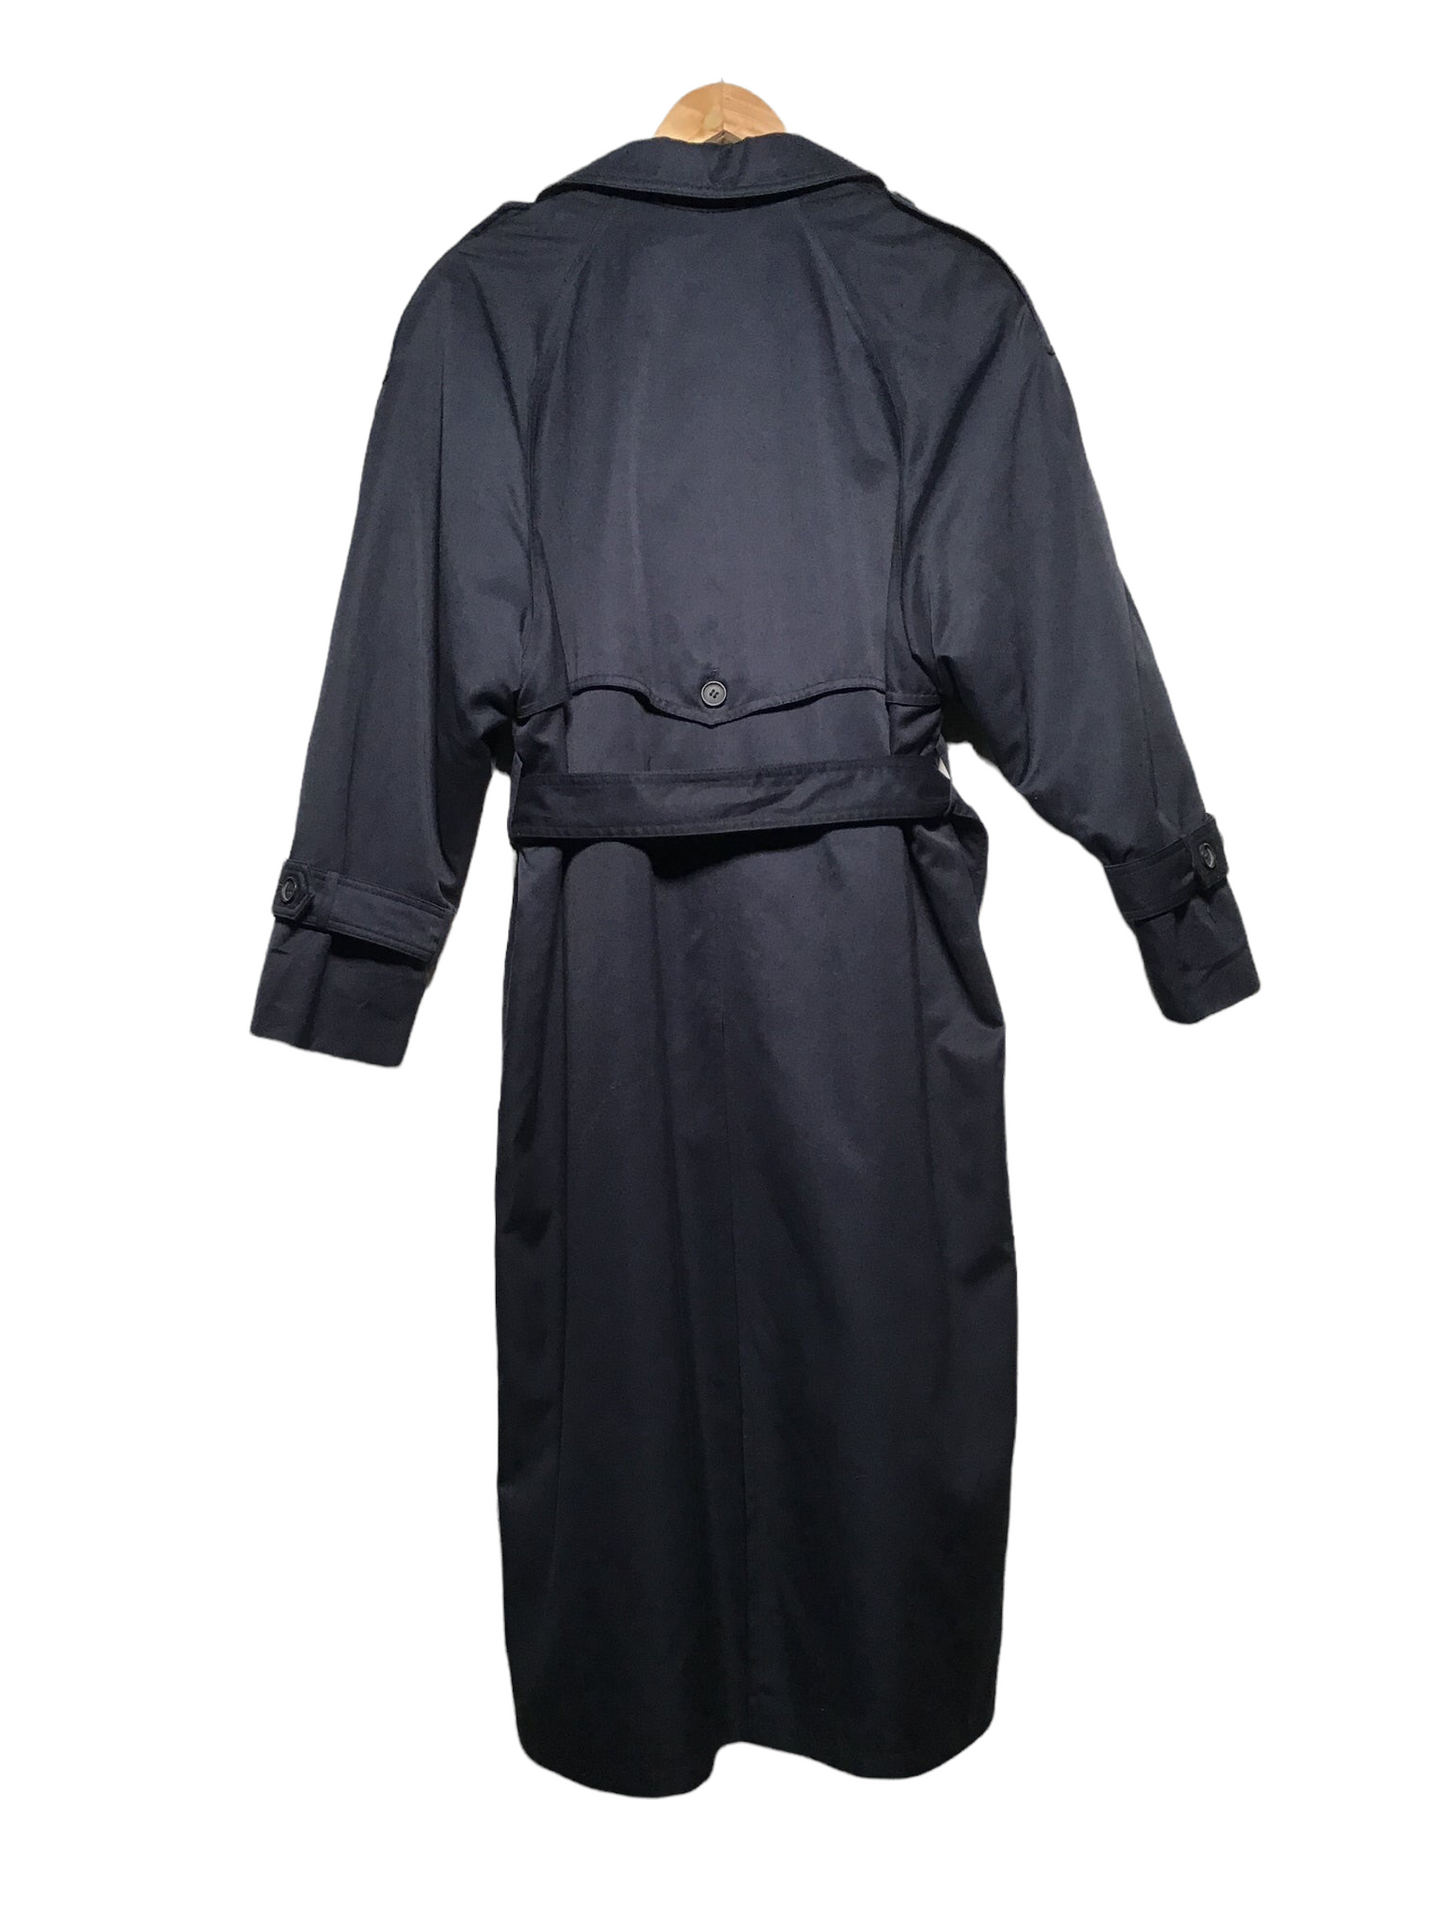 Belted and Lined Trench Coat (Size M/L)